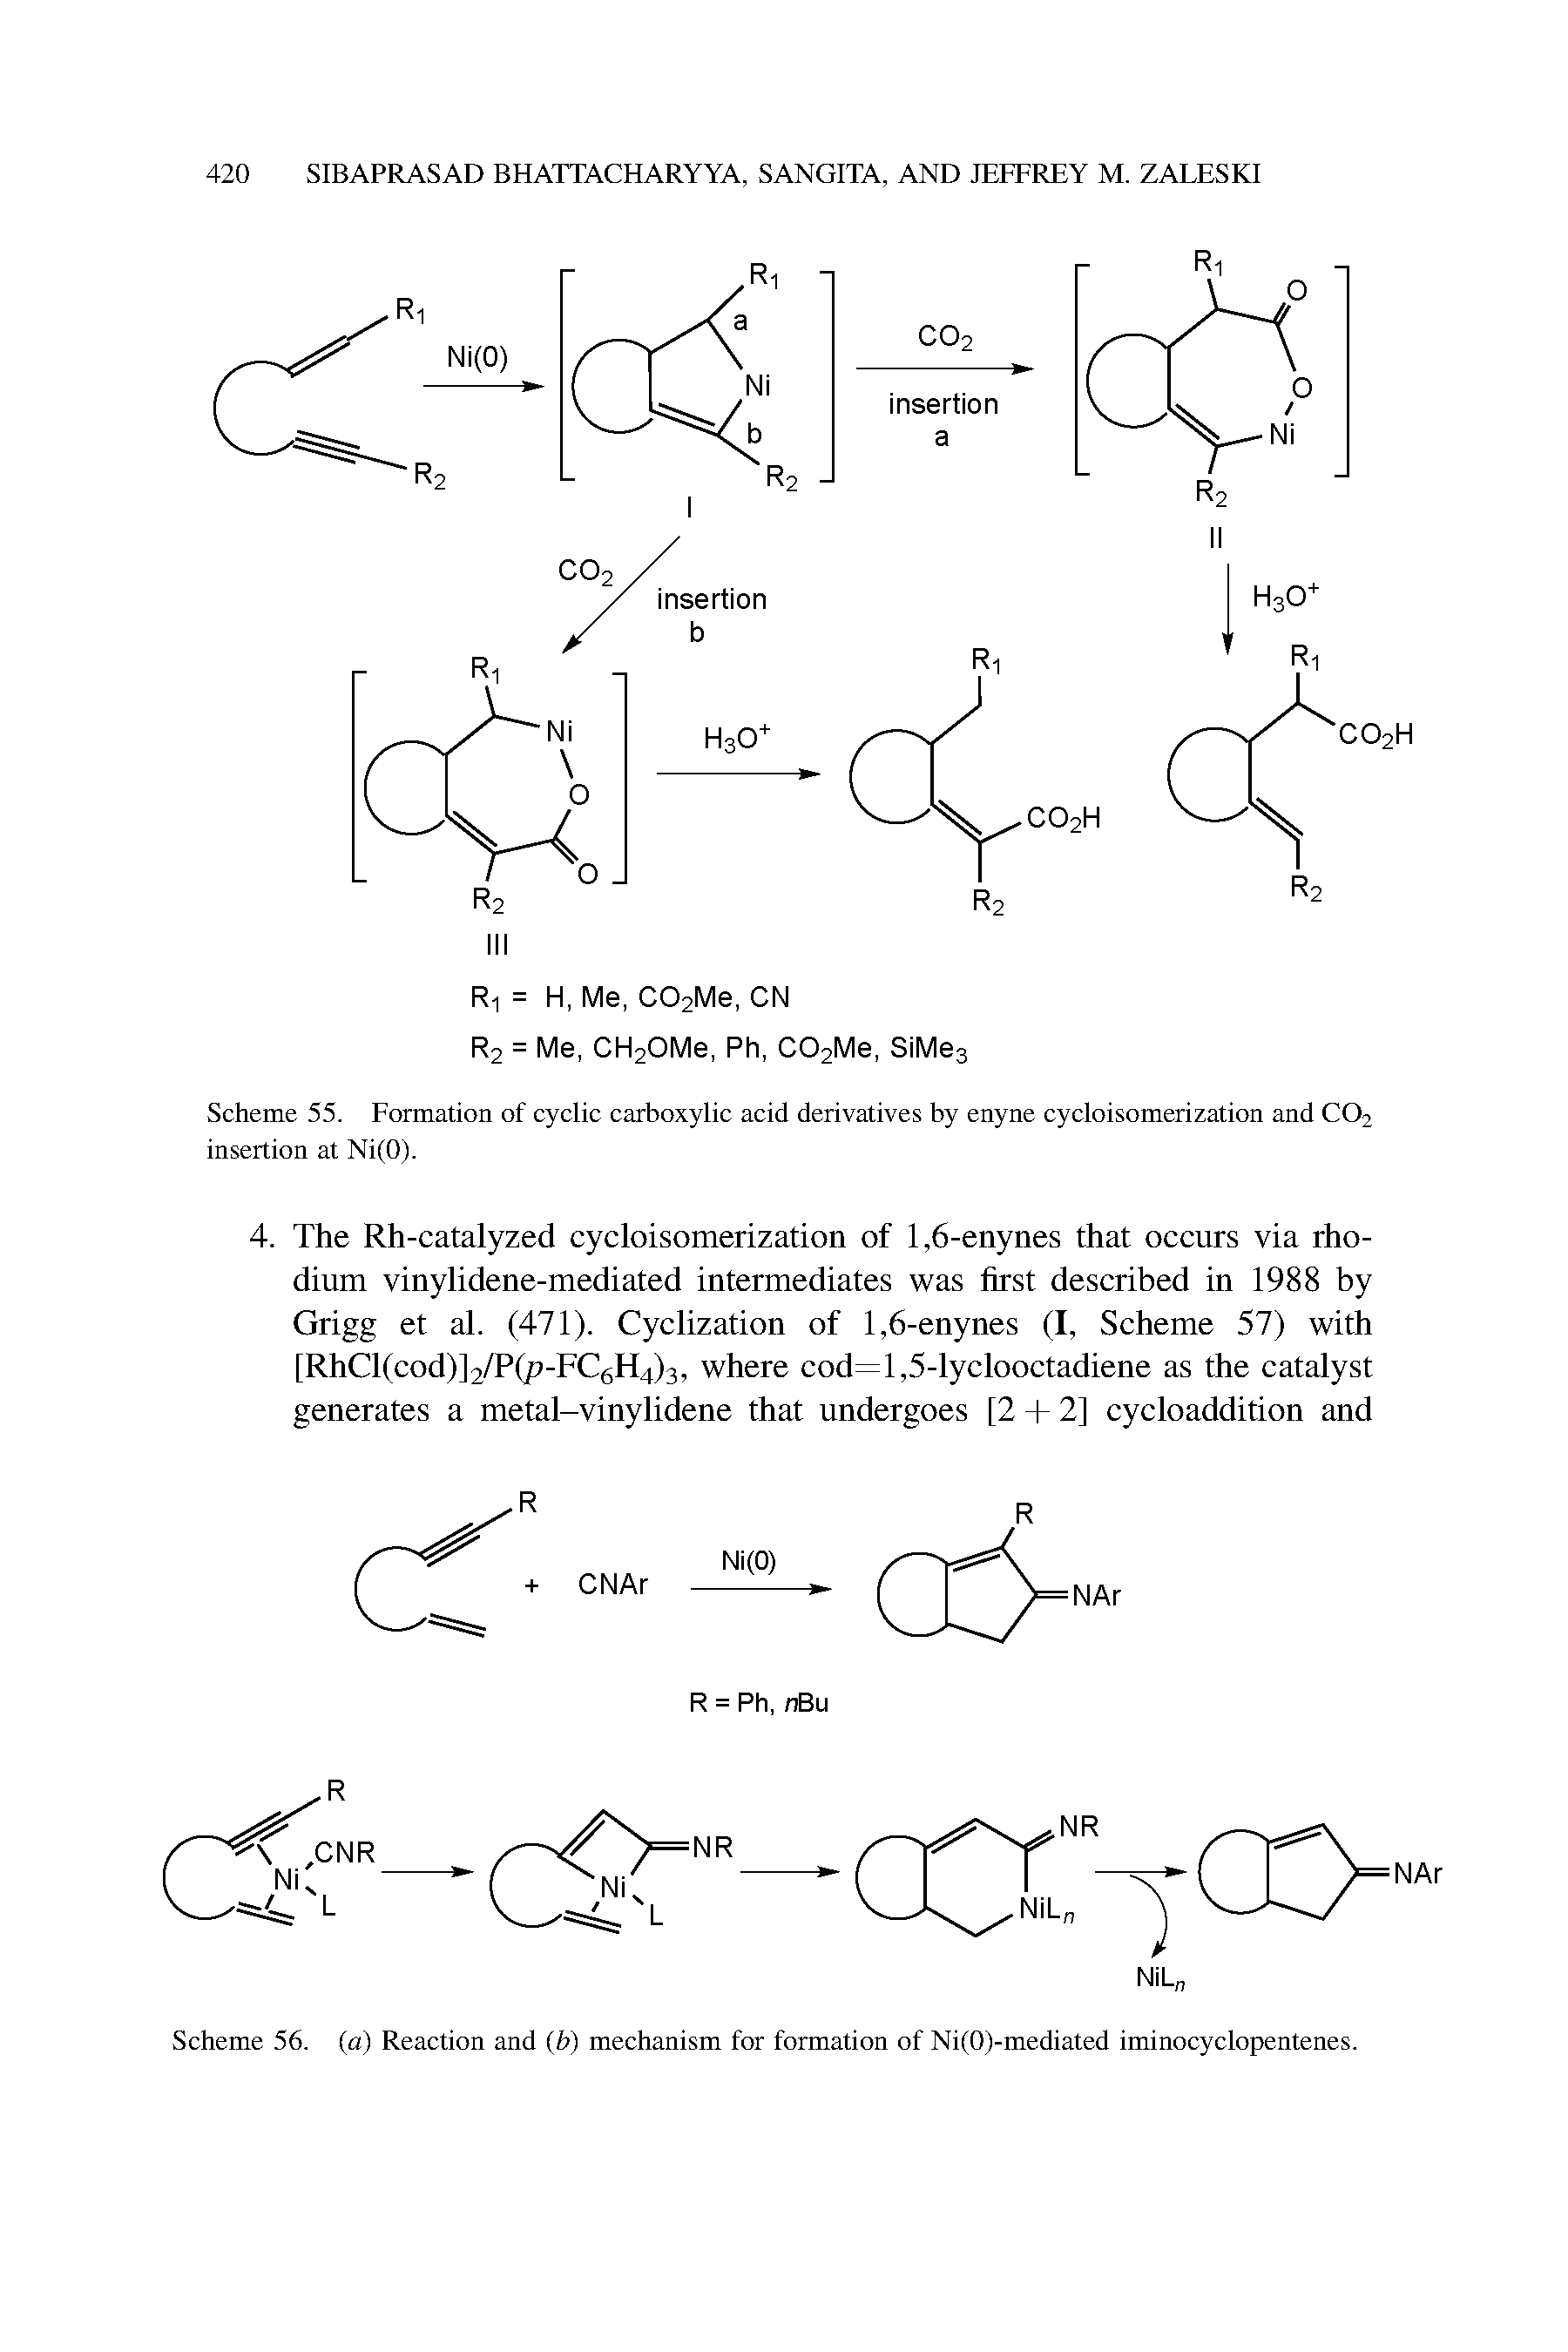 Scheme 55. Formation of cyclic carboxylic acid derivatives by enyne cycloisomerization and CO2 insertion at Ni(0).